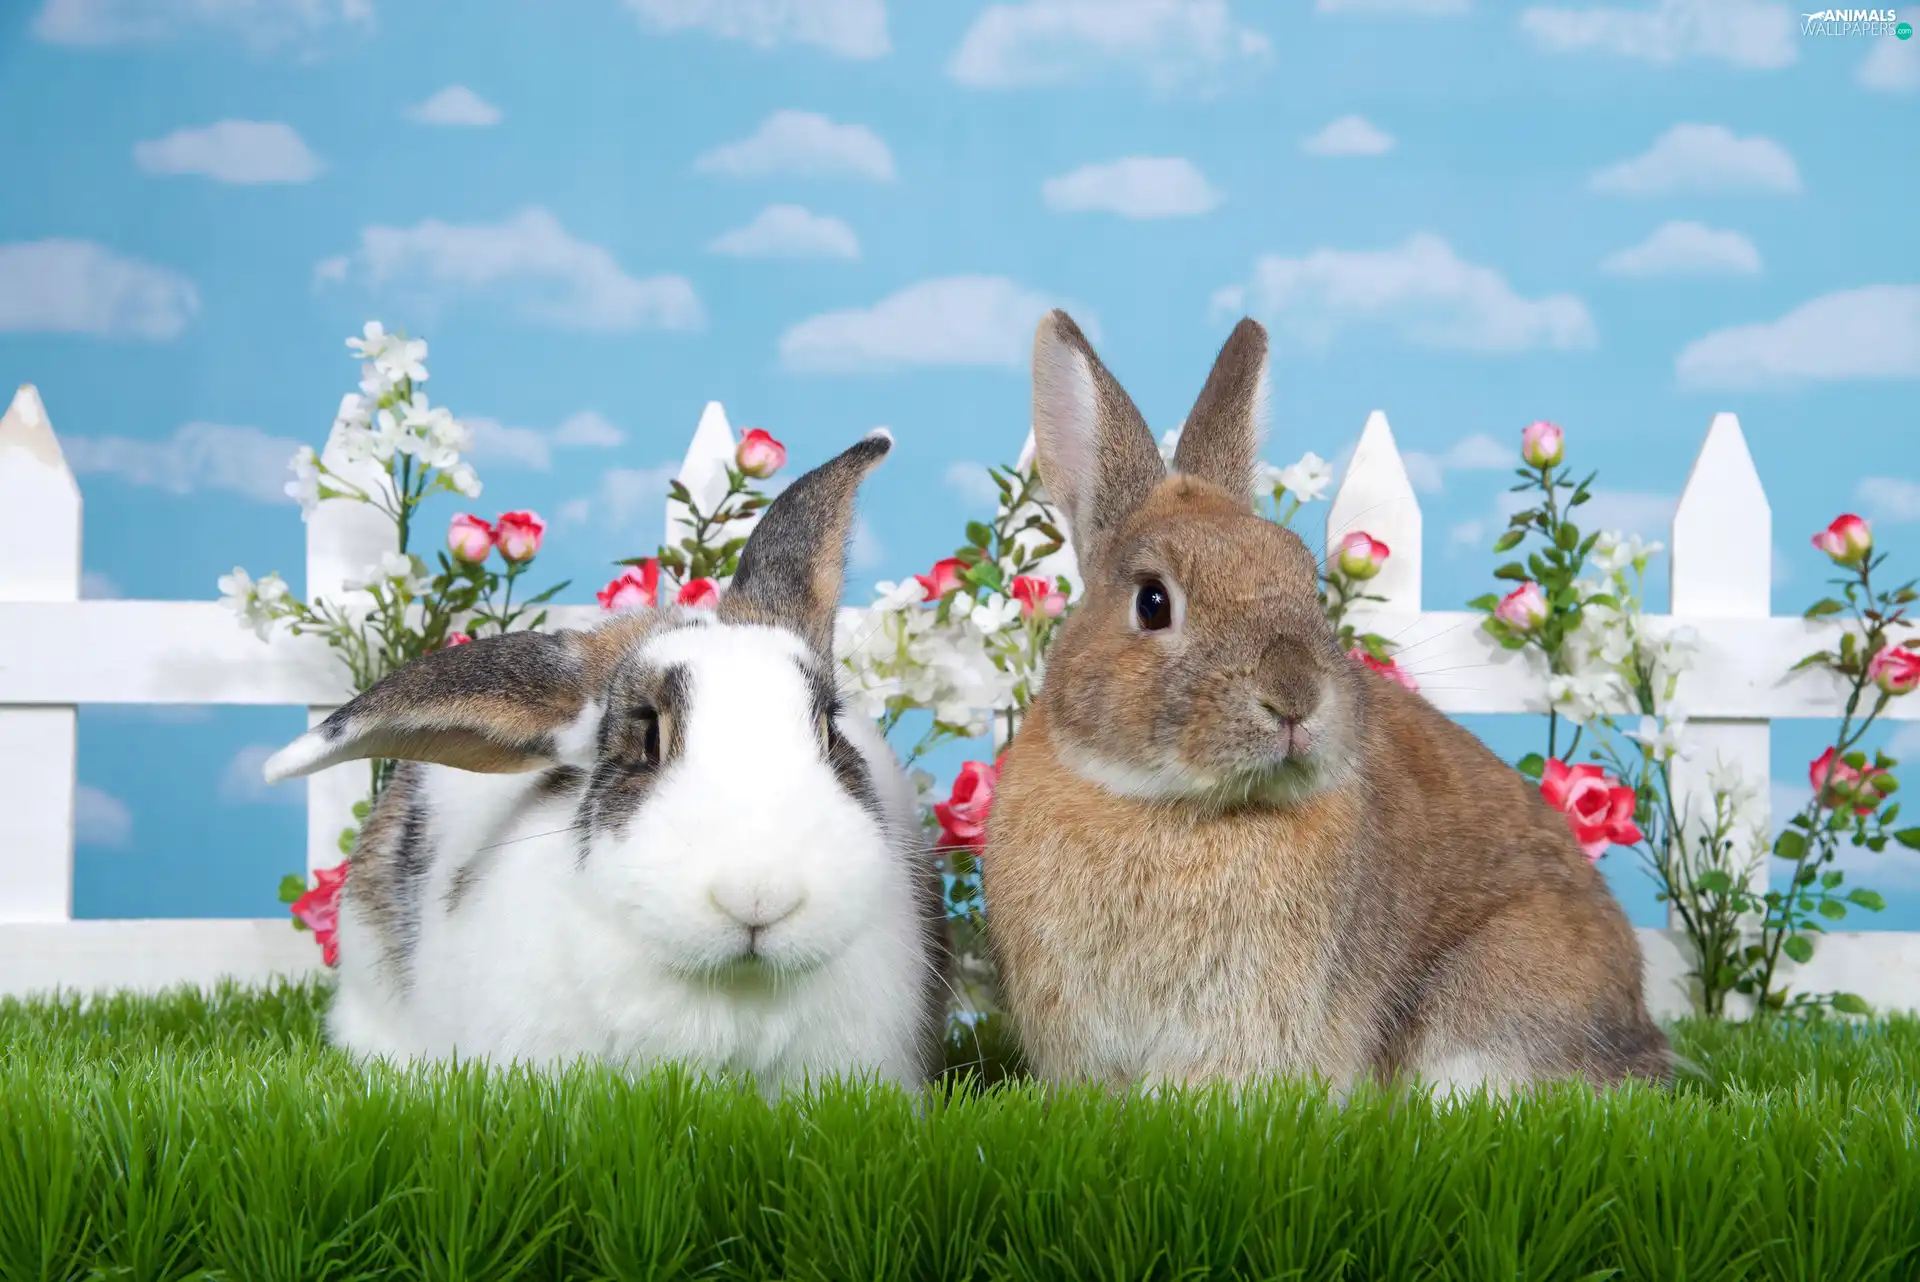 Hurdle, Flowers, Rabbits, grass, Two cars